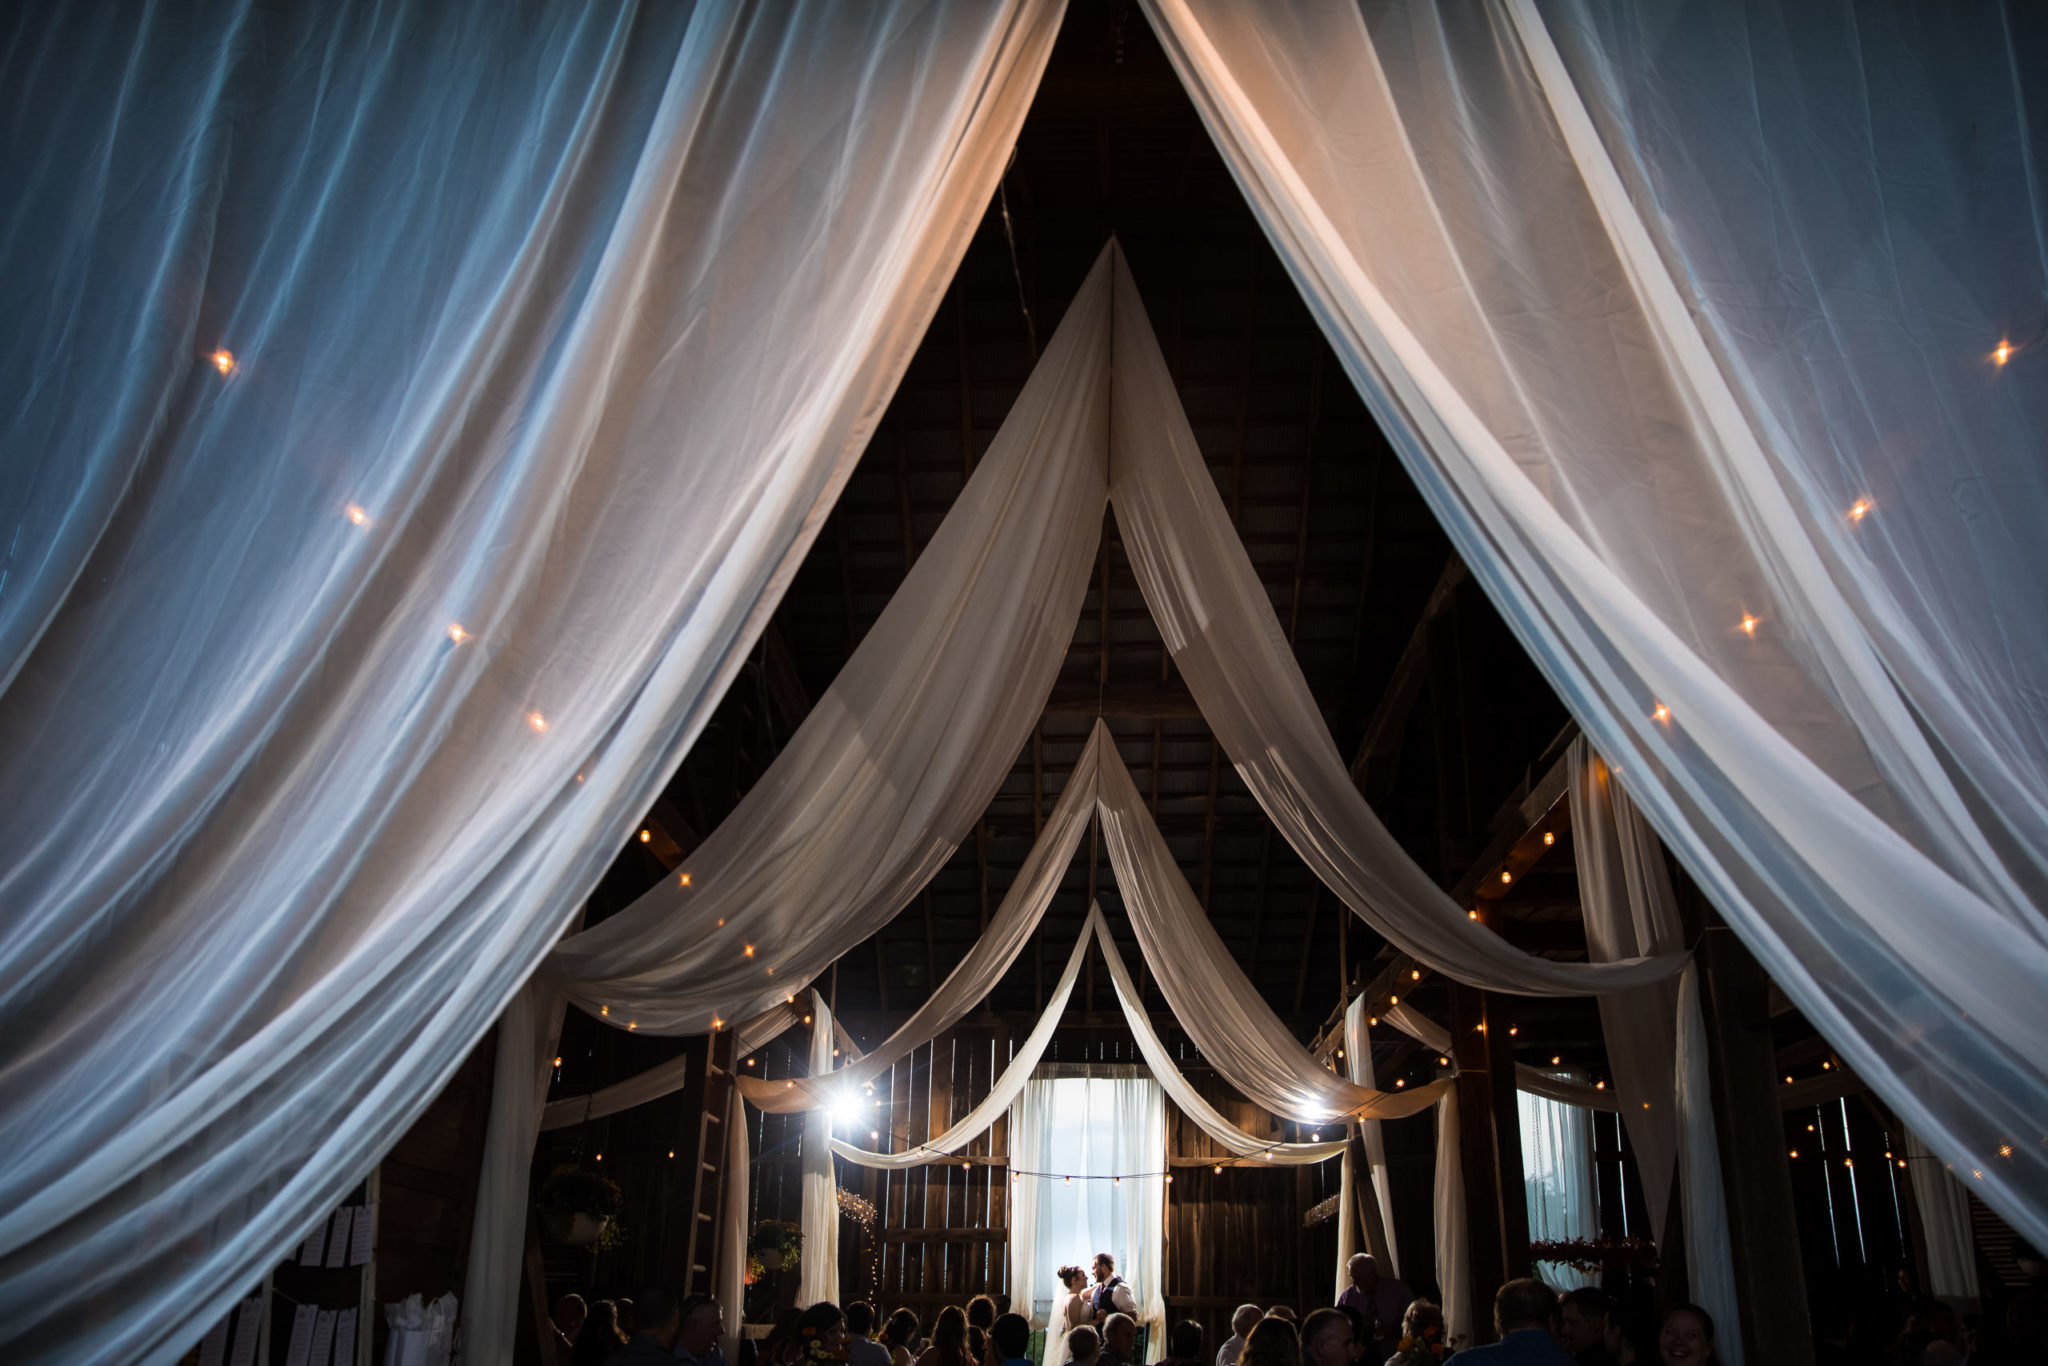 Central PA Wedding Photographer, Lisa Rhinehart, captures this image of the bride and groom as they share their first dance underneath the curtains draped down 